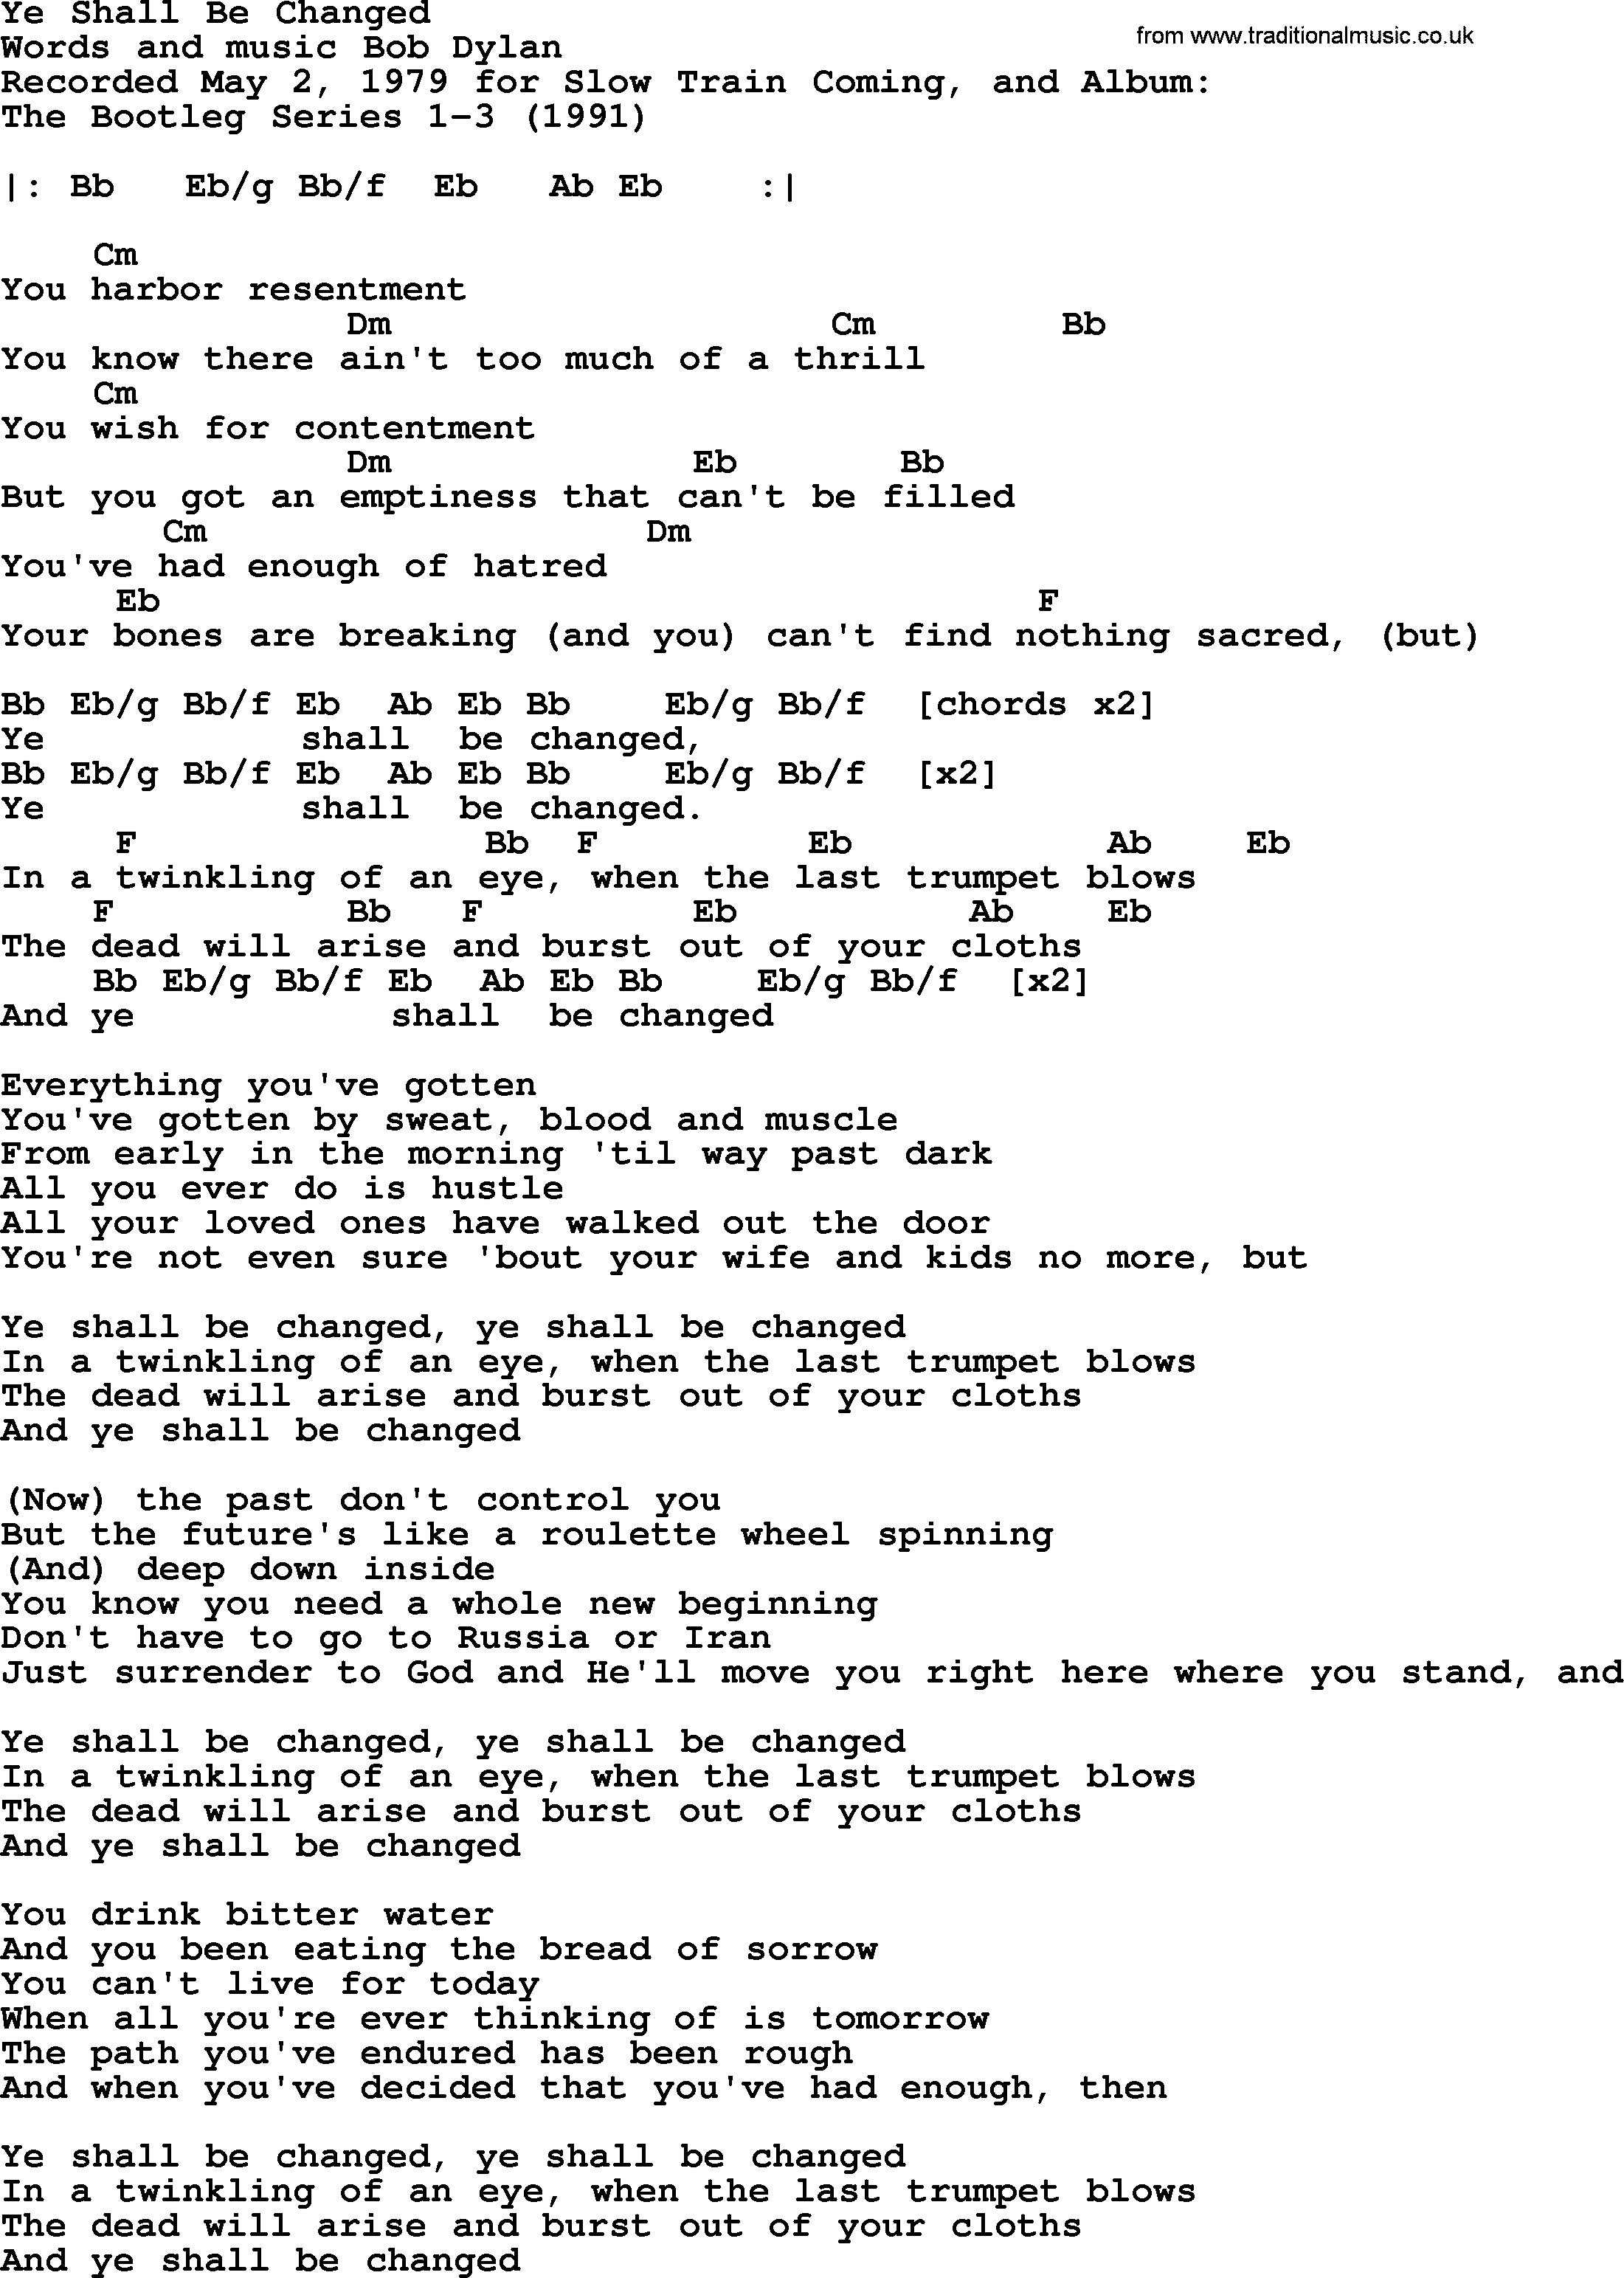 Bob Dylan song, lyrics with chords - Ye Shall Be Changed